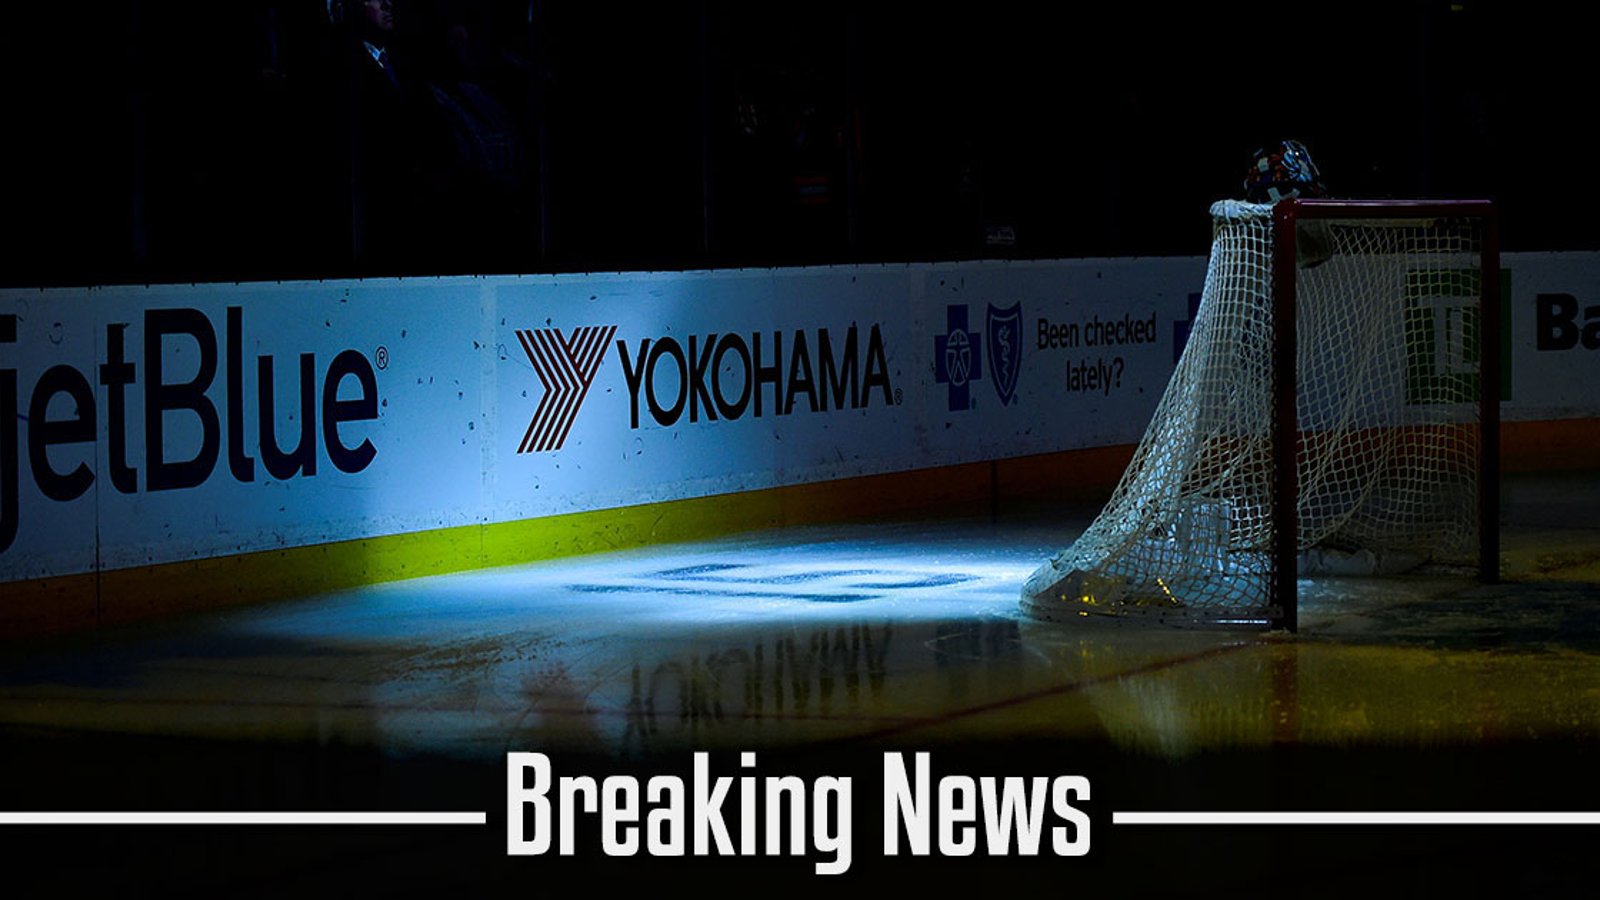 Breaking: NHL goalie pulled in his first game since signing with new team.